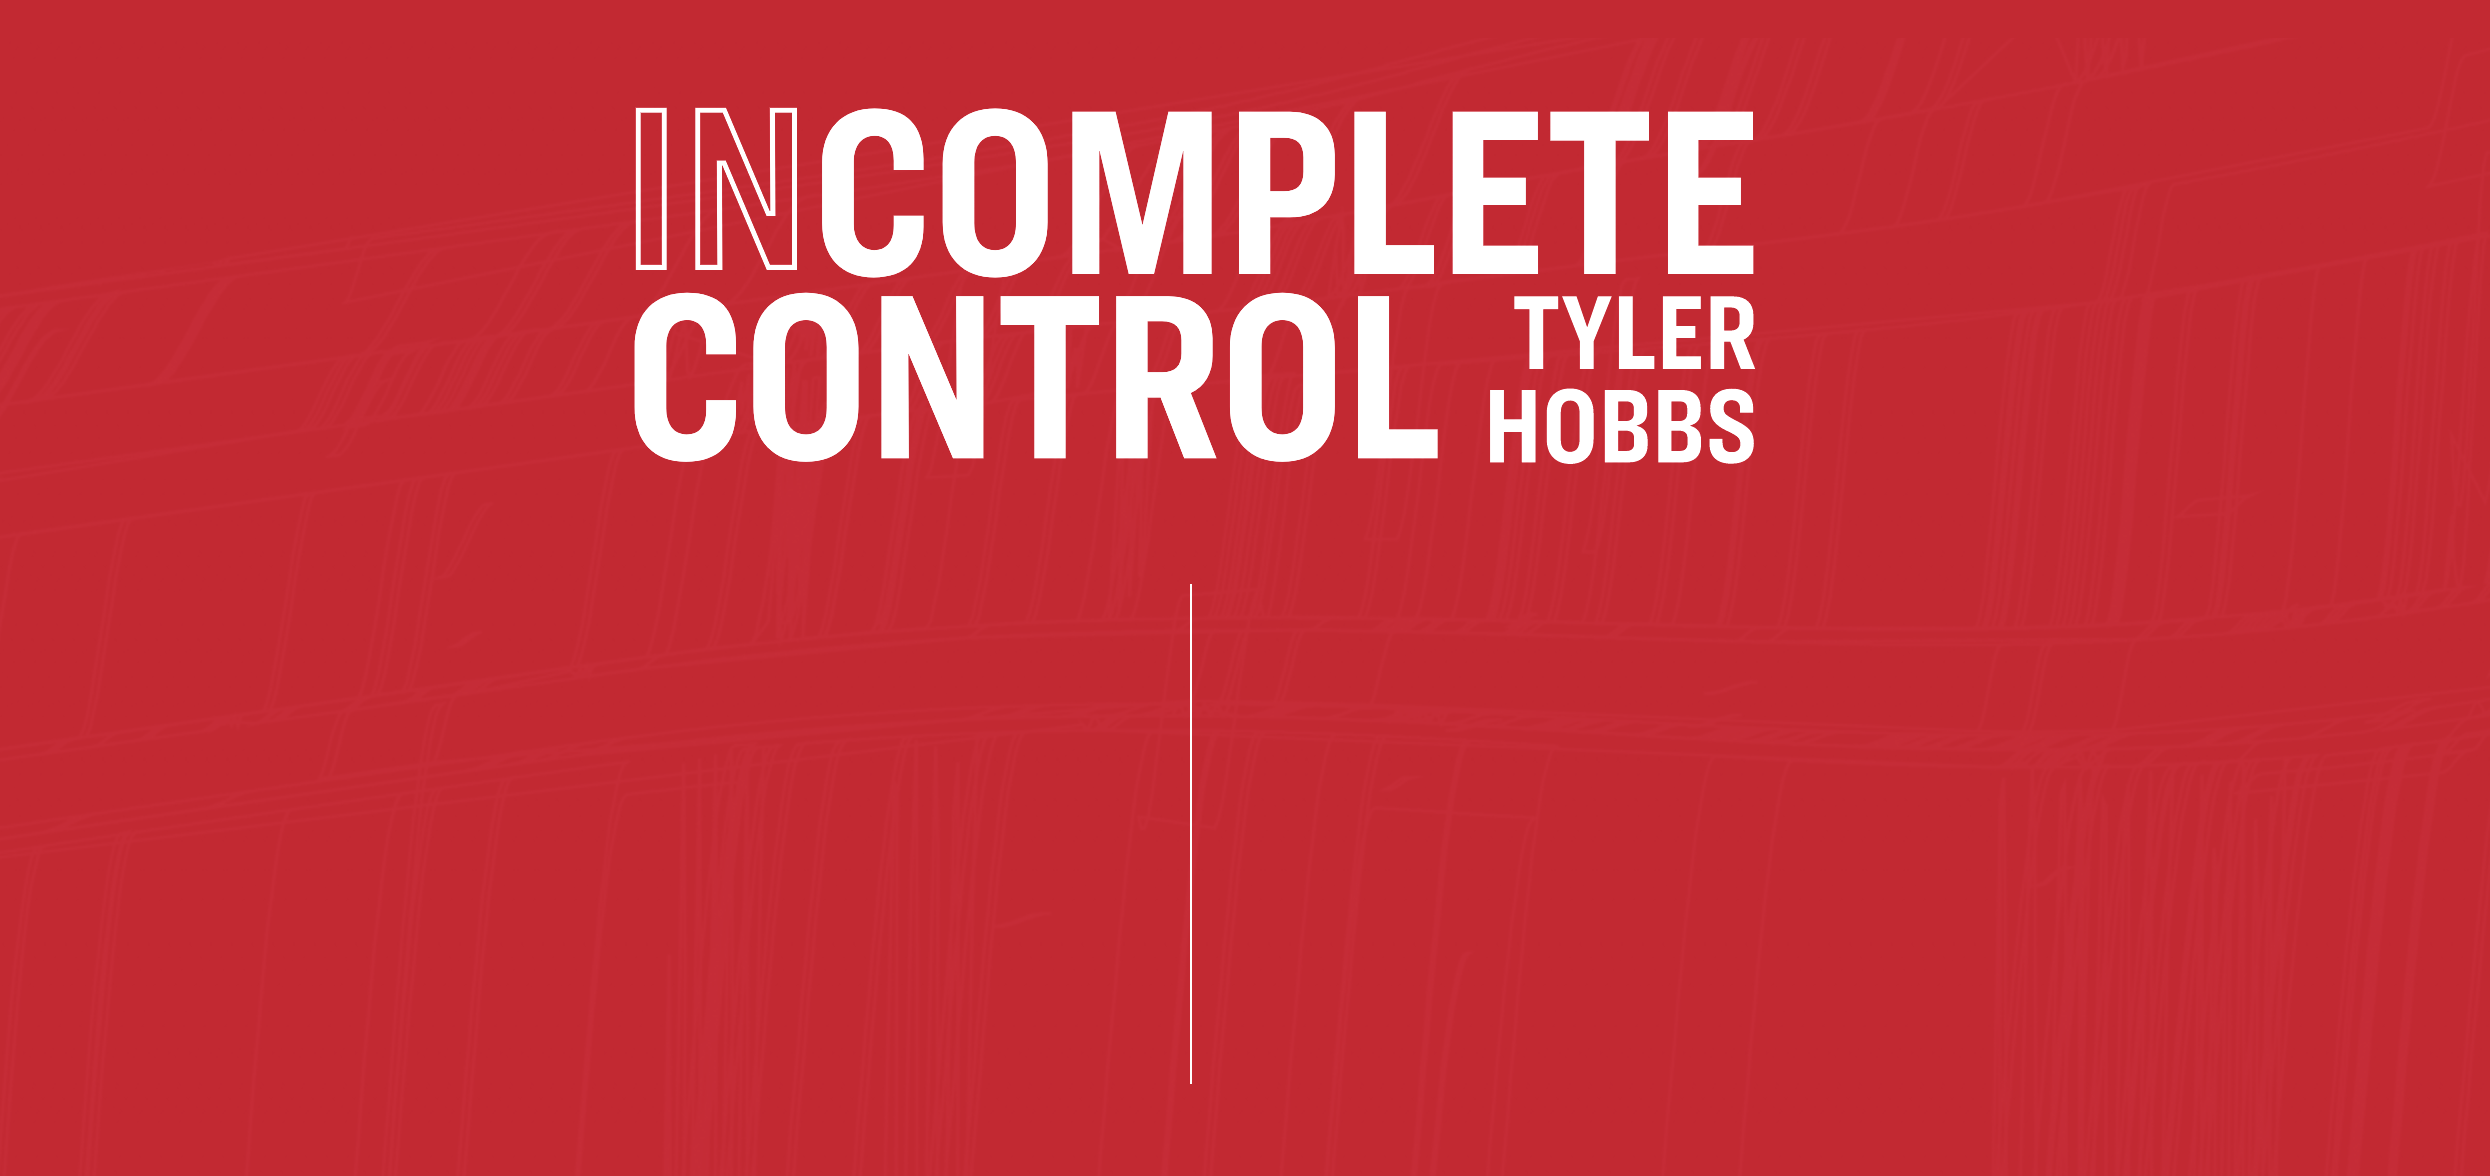 Homepage of Incomplete Control, the new NFT collection coming from Tyler Hobbs